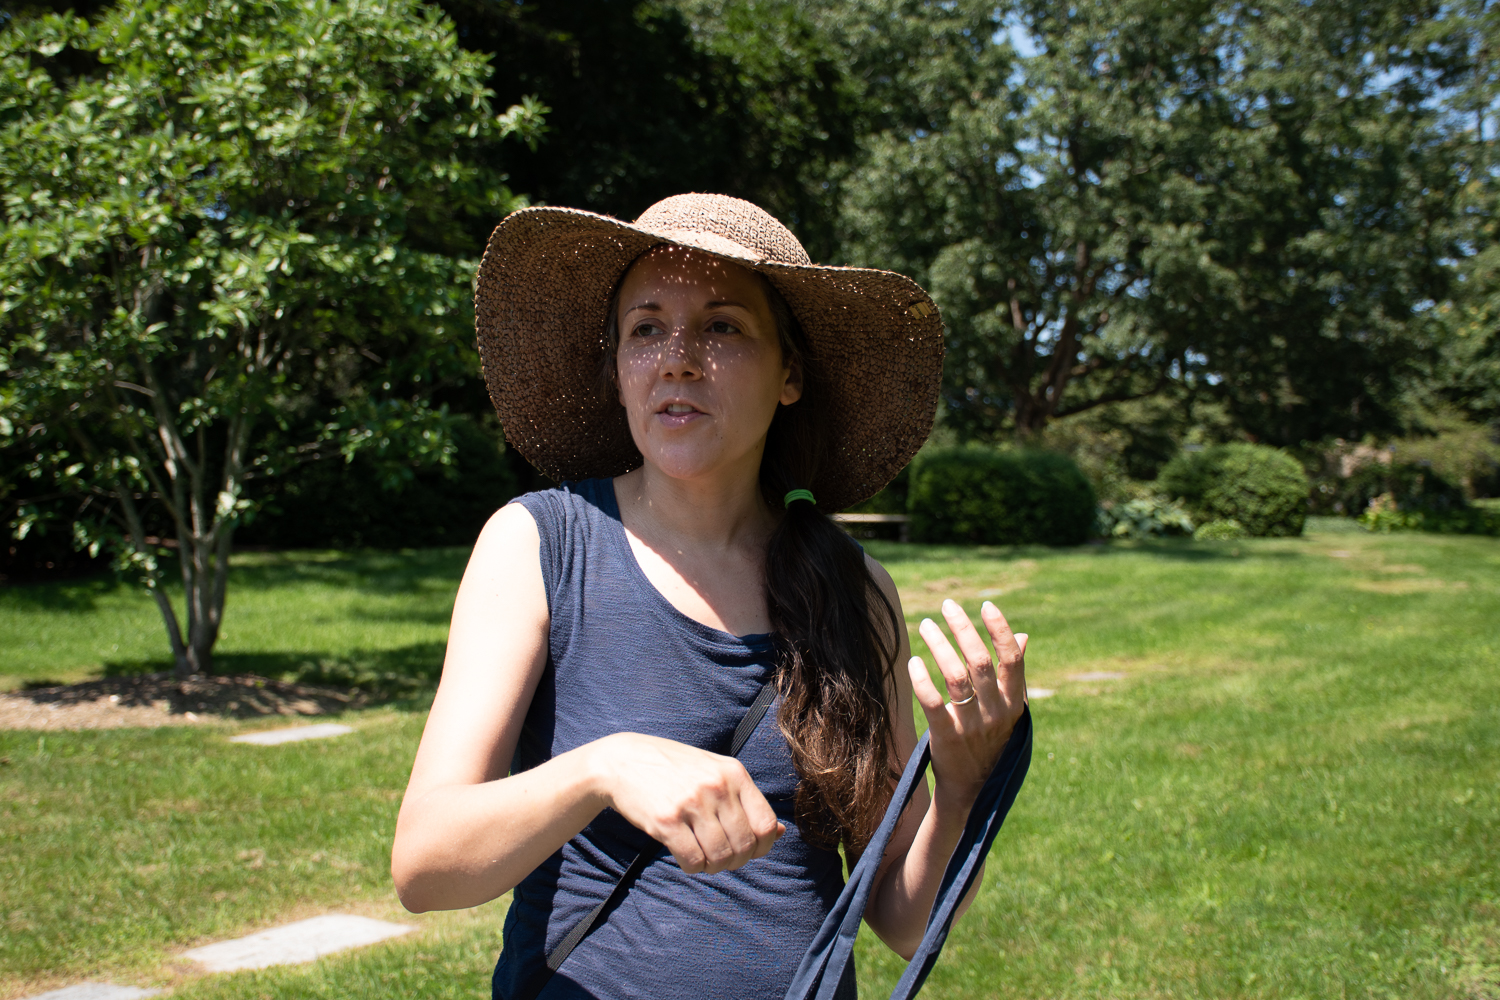 Amy Mertl wearing a sunhat and speaking outside.